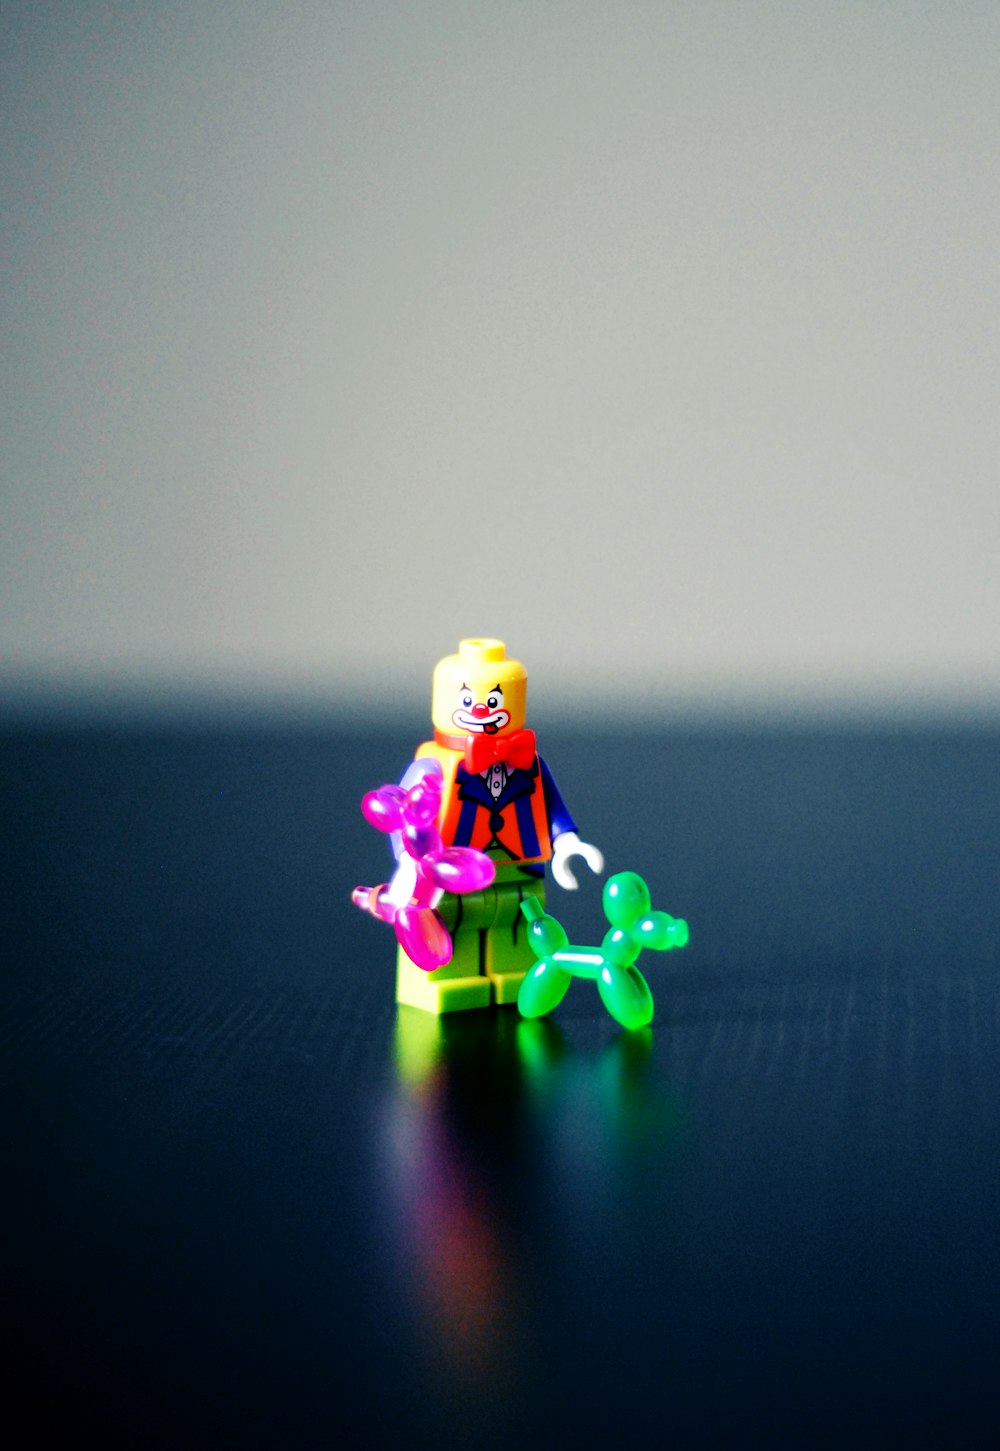 selective photography of Clown minifig toy